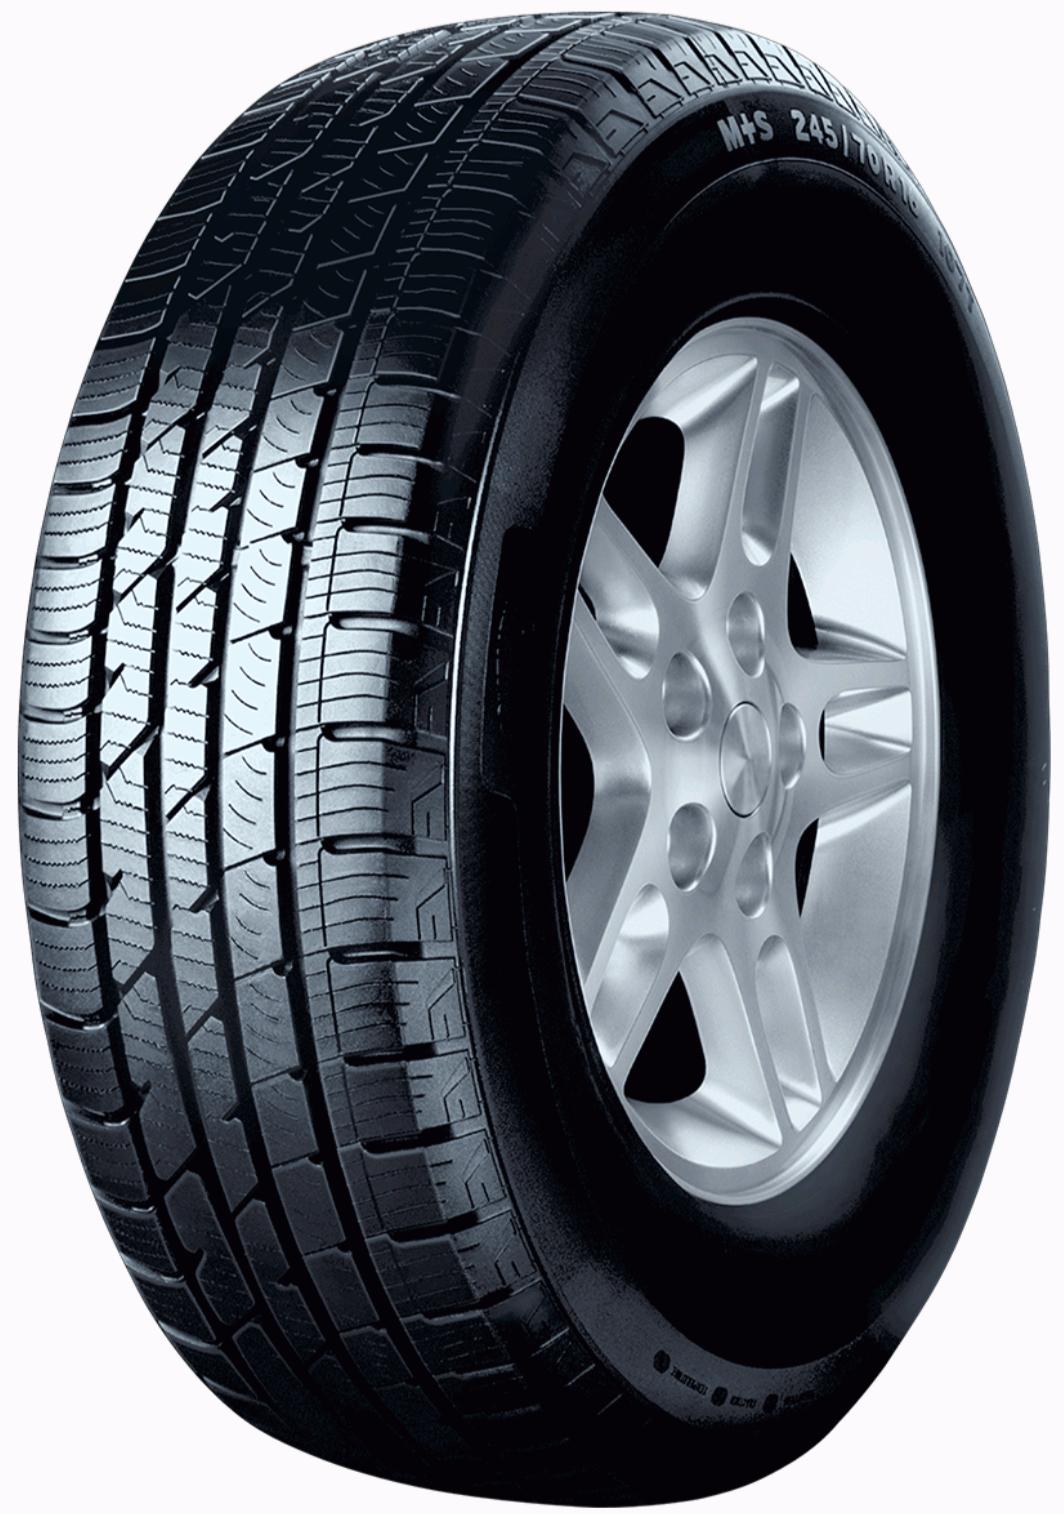 Continental CrossContact LX 2 FR M+S Summer Tire 215/65R16 98H 